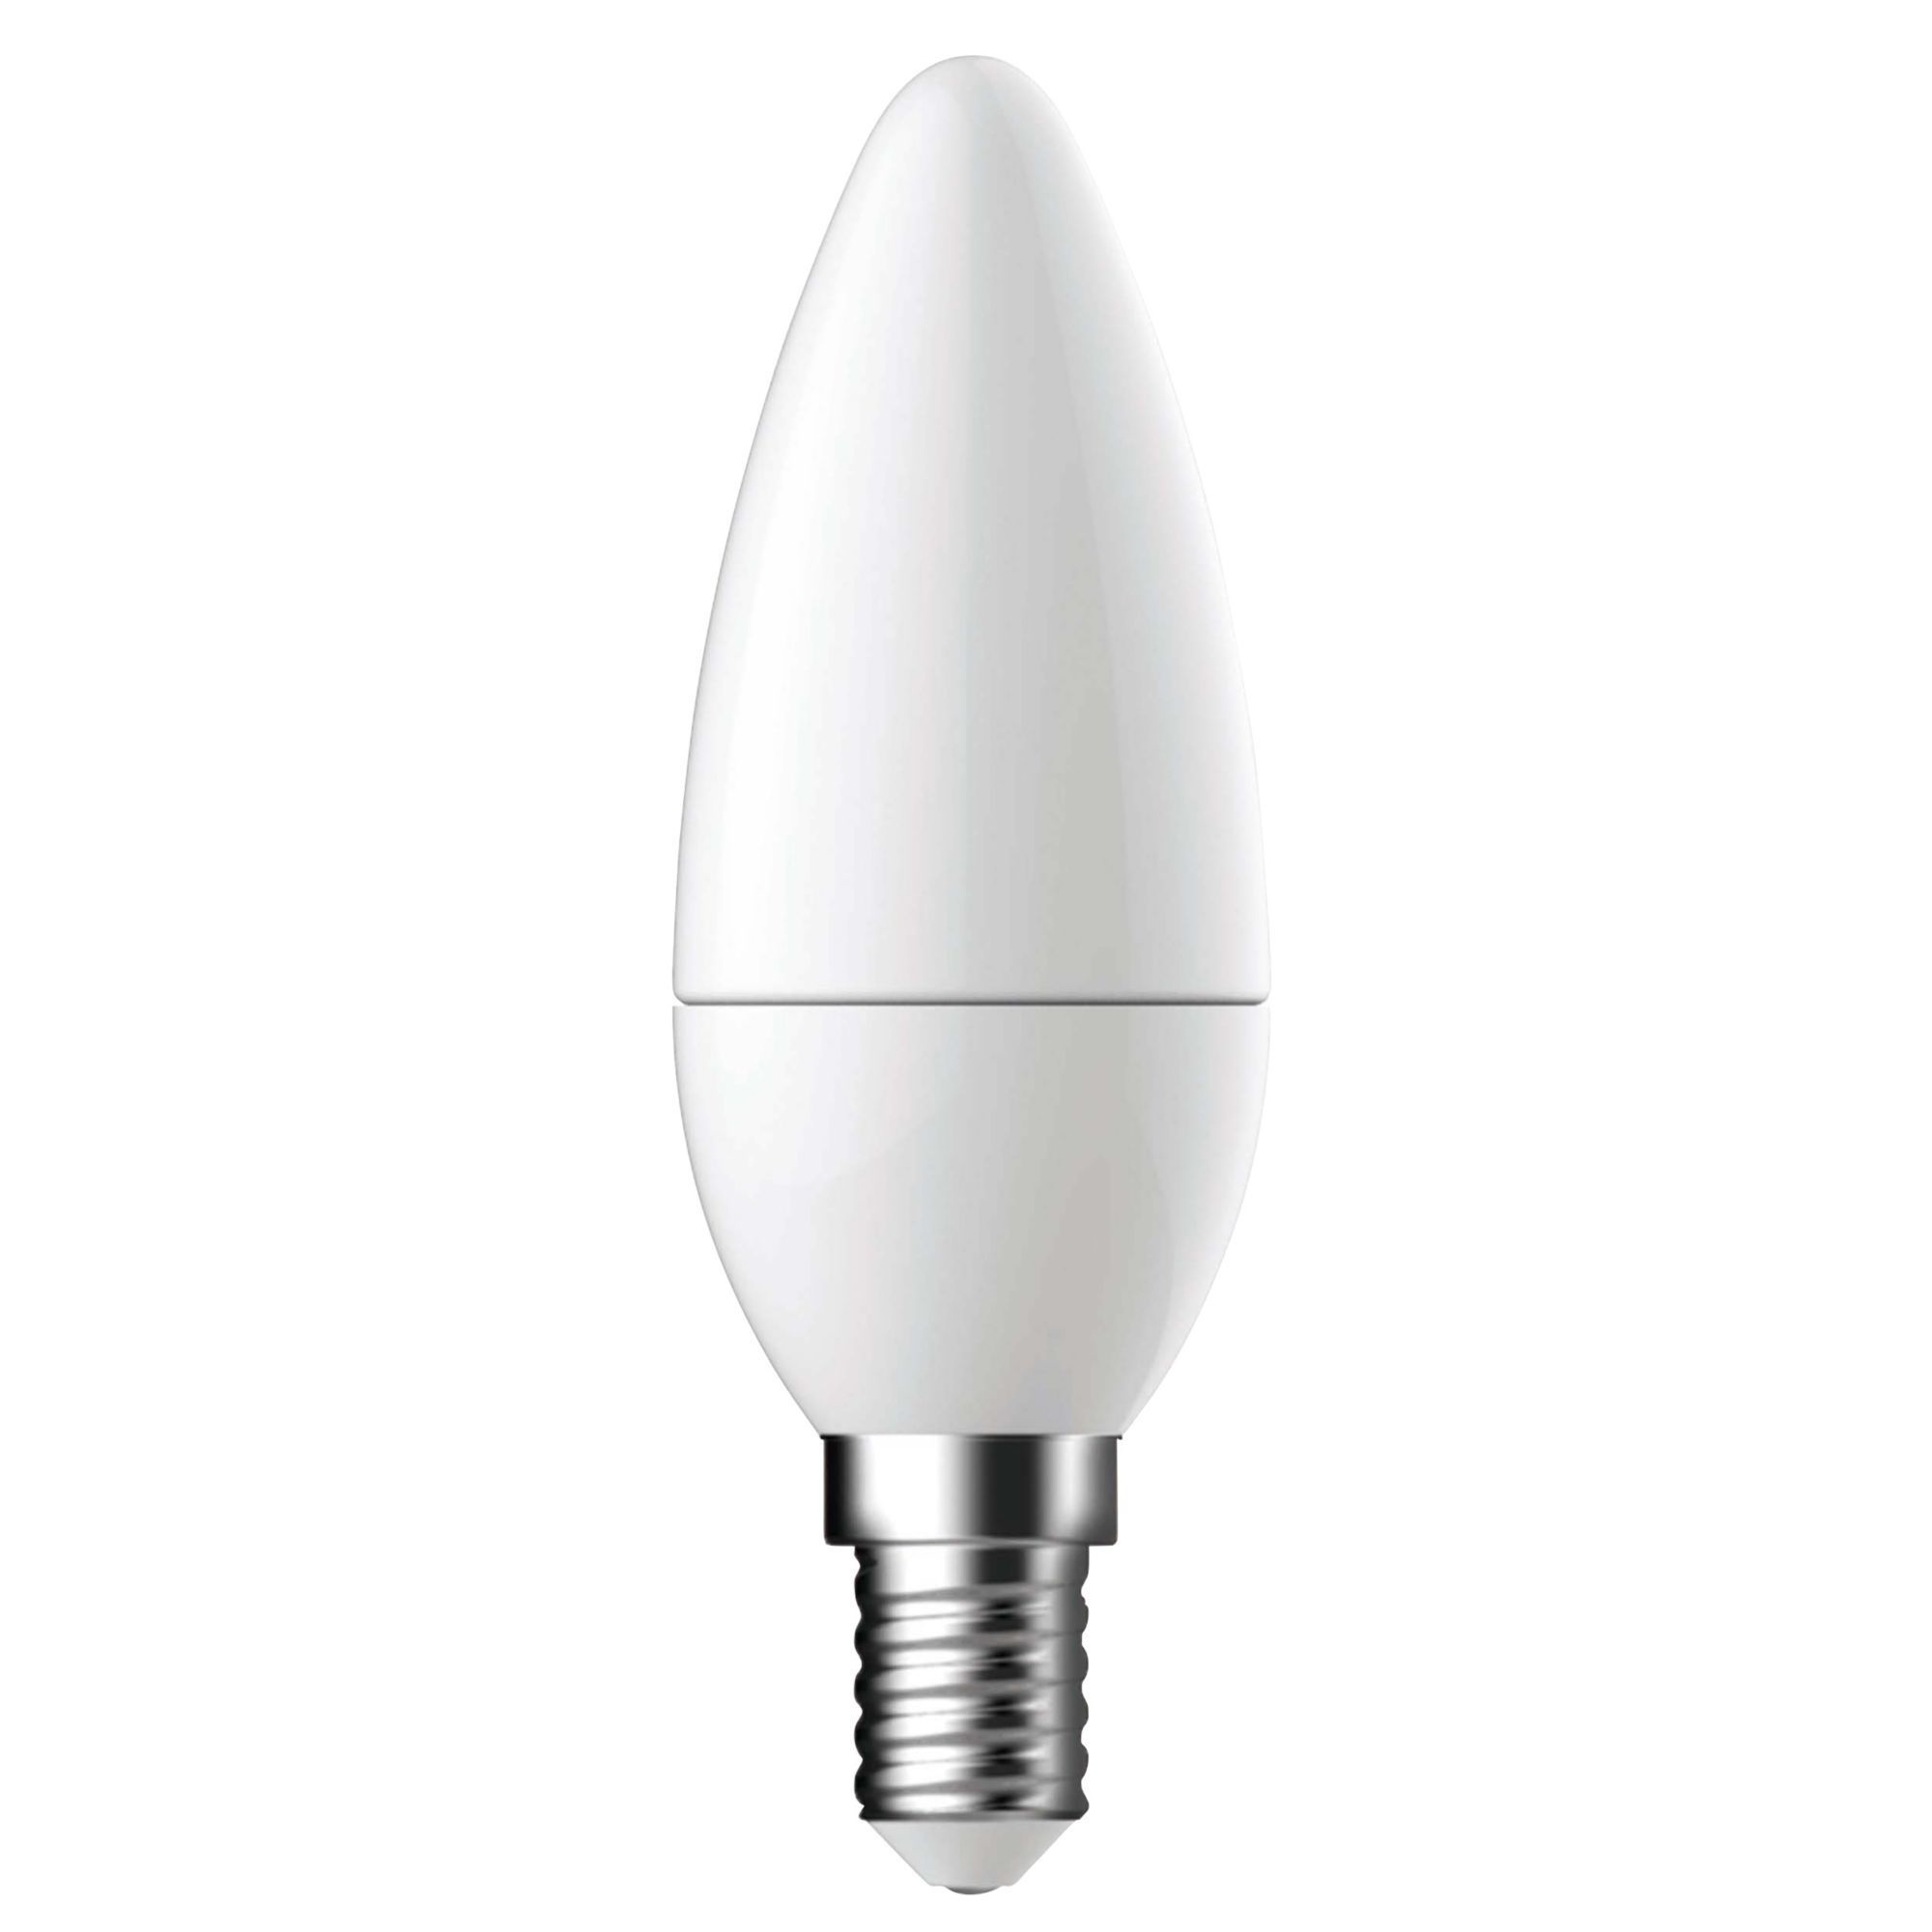 Diall E14 3.6W 250lm Candle LED Light bulb, Pack of 3